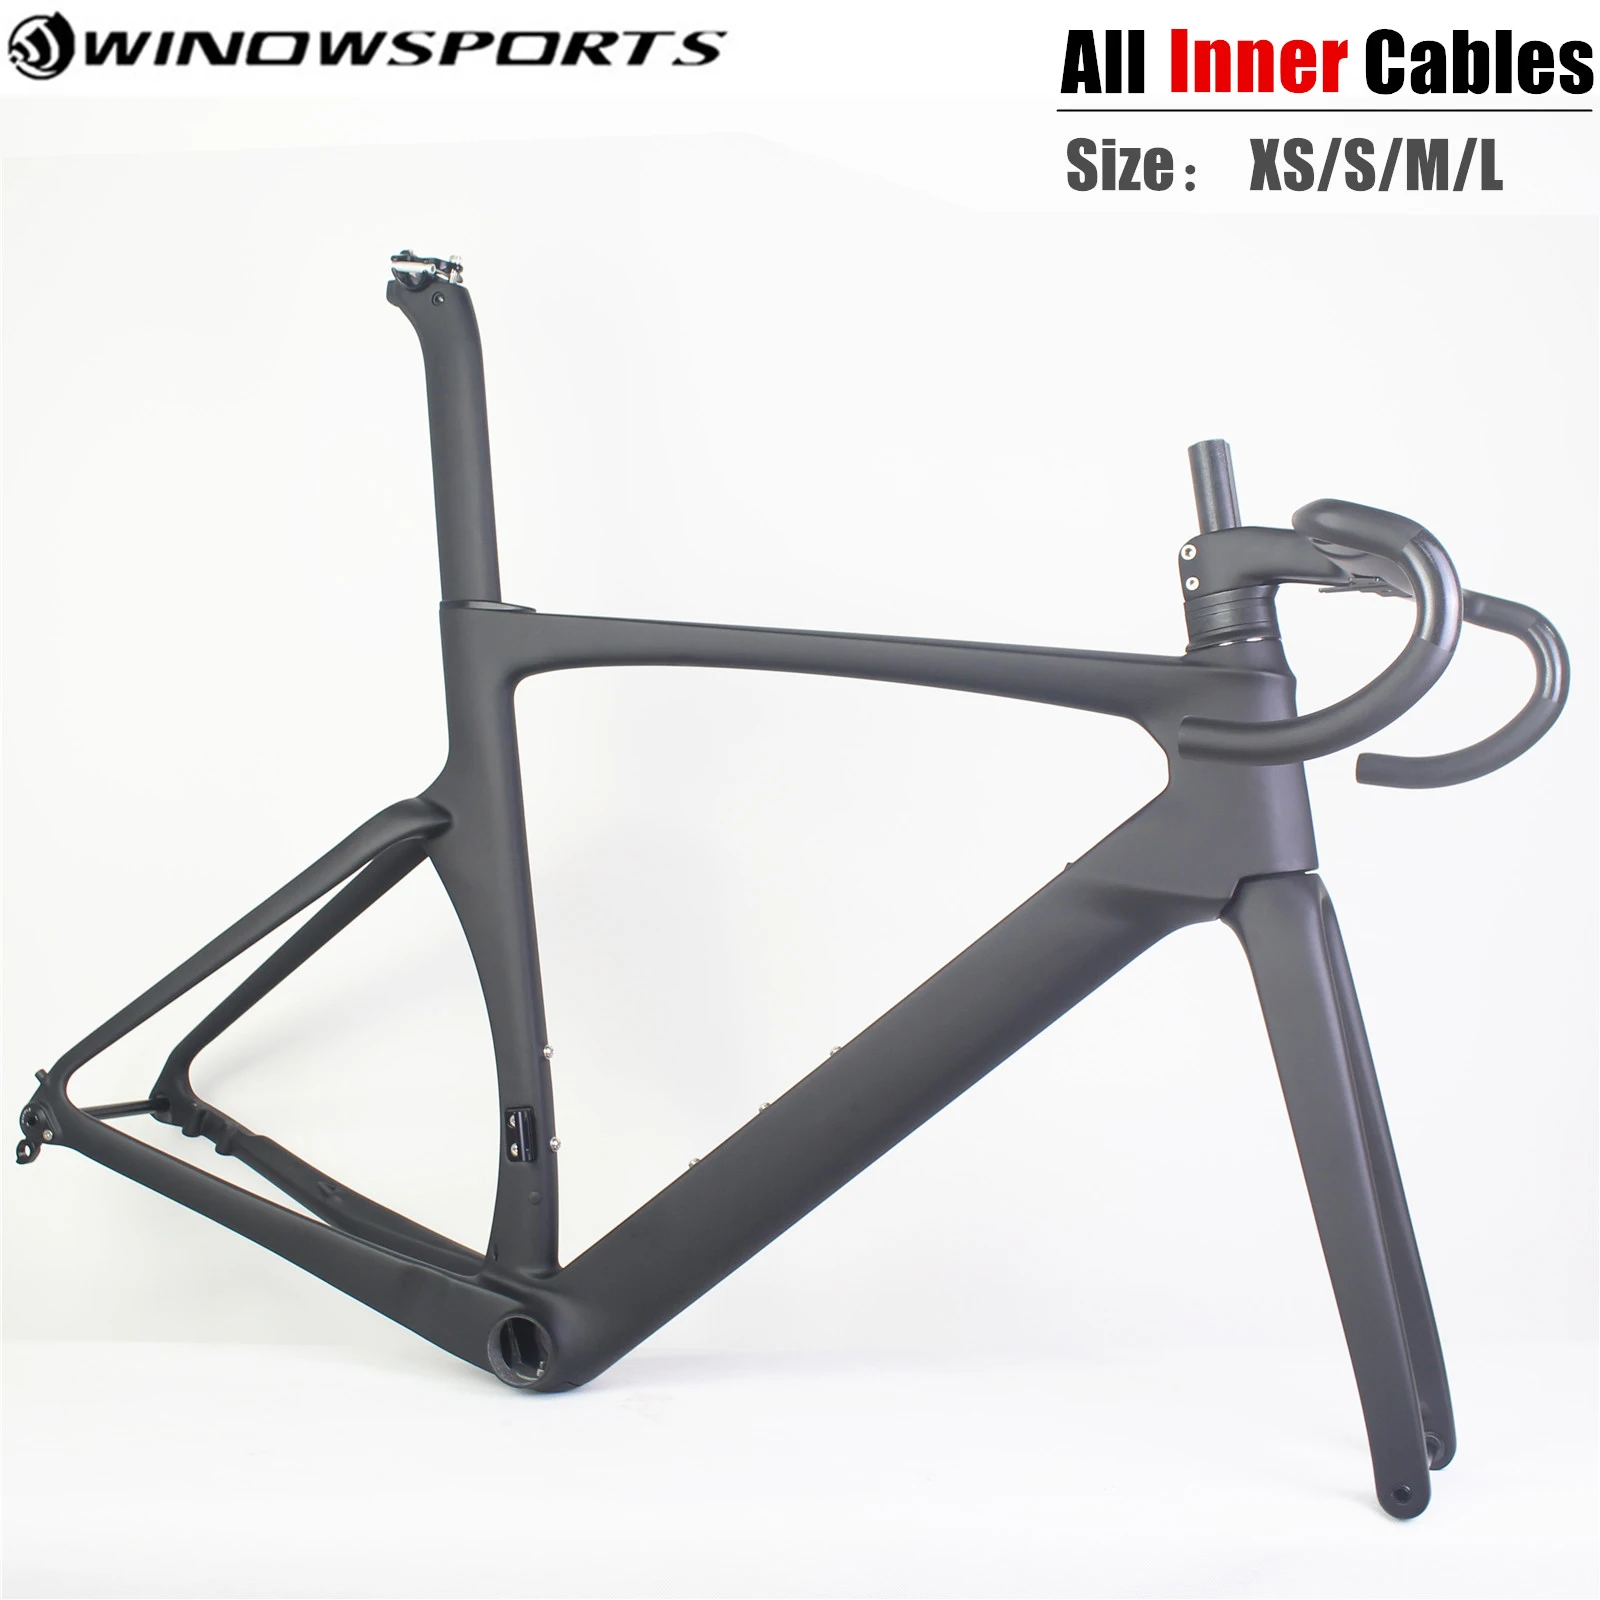 

2020 carbon frame road disc brakes bike with thru AXle 100*12 142*12mm 700C aero road bicyle frameset support Di2 size XS/S/M/L